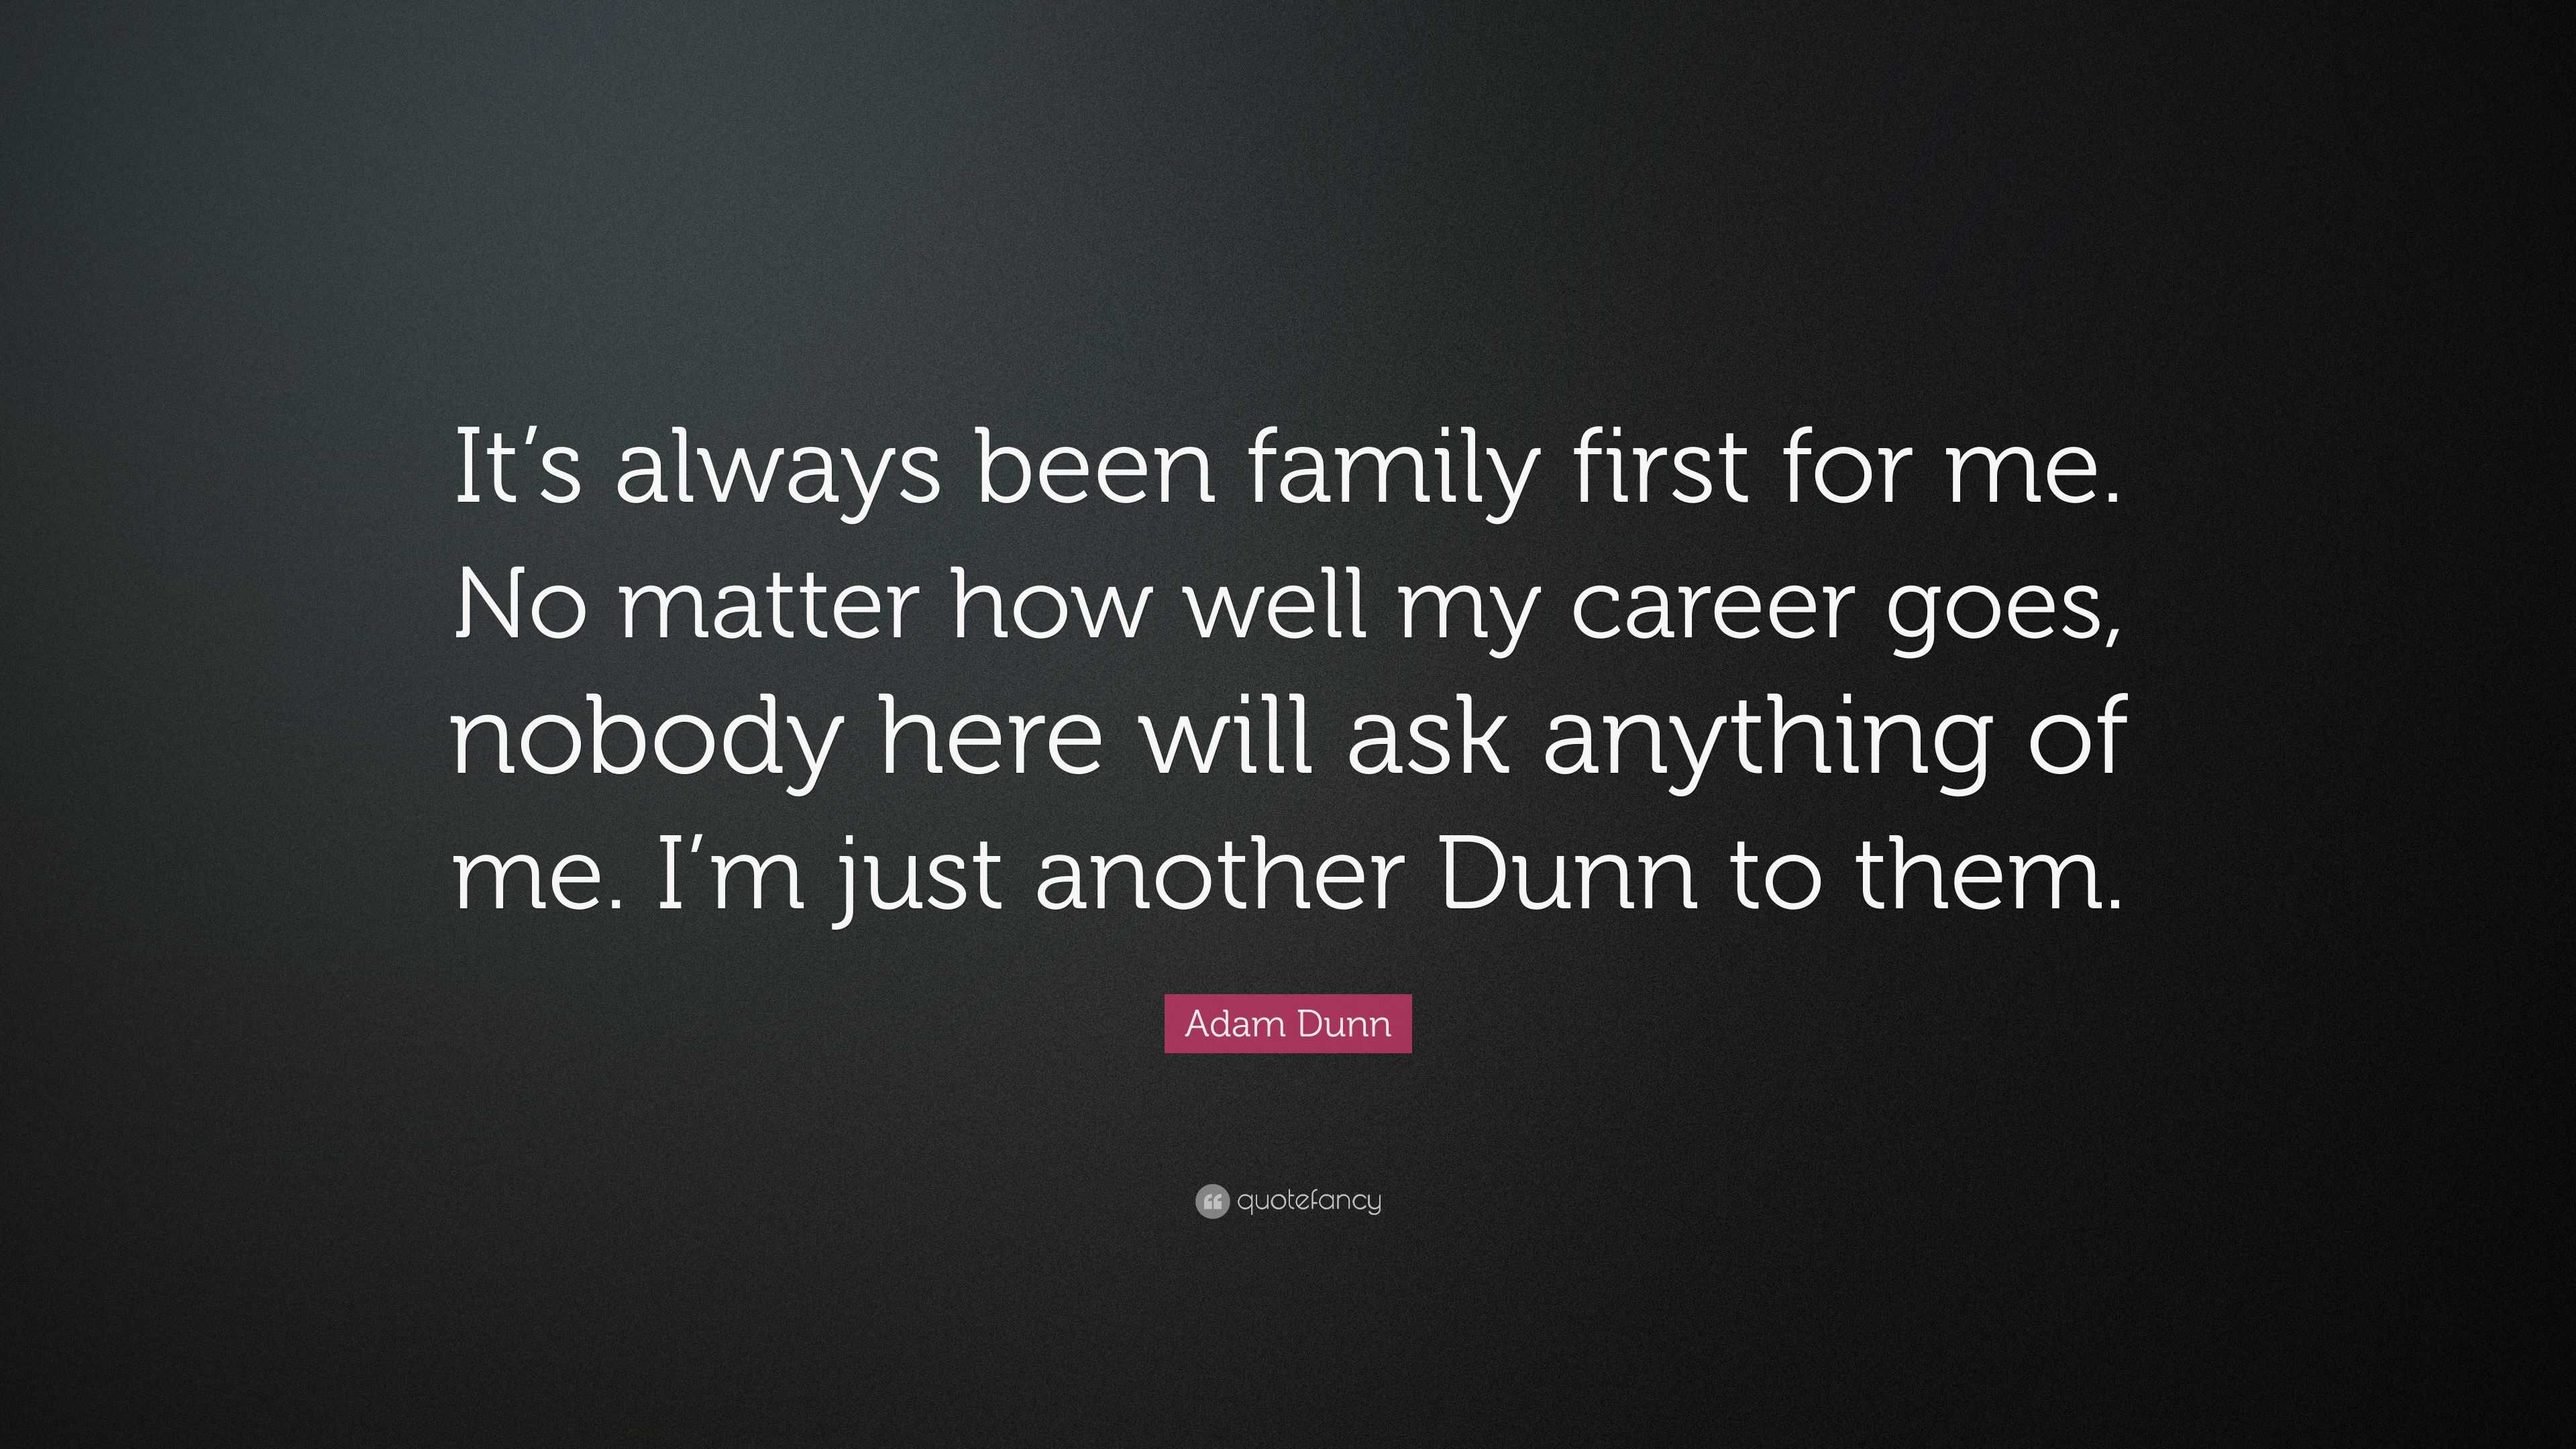 Adam Dunn Quote: “It's always been family first for me. No matter